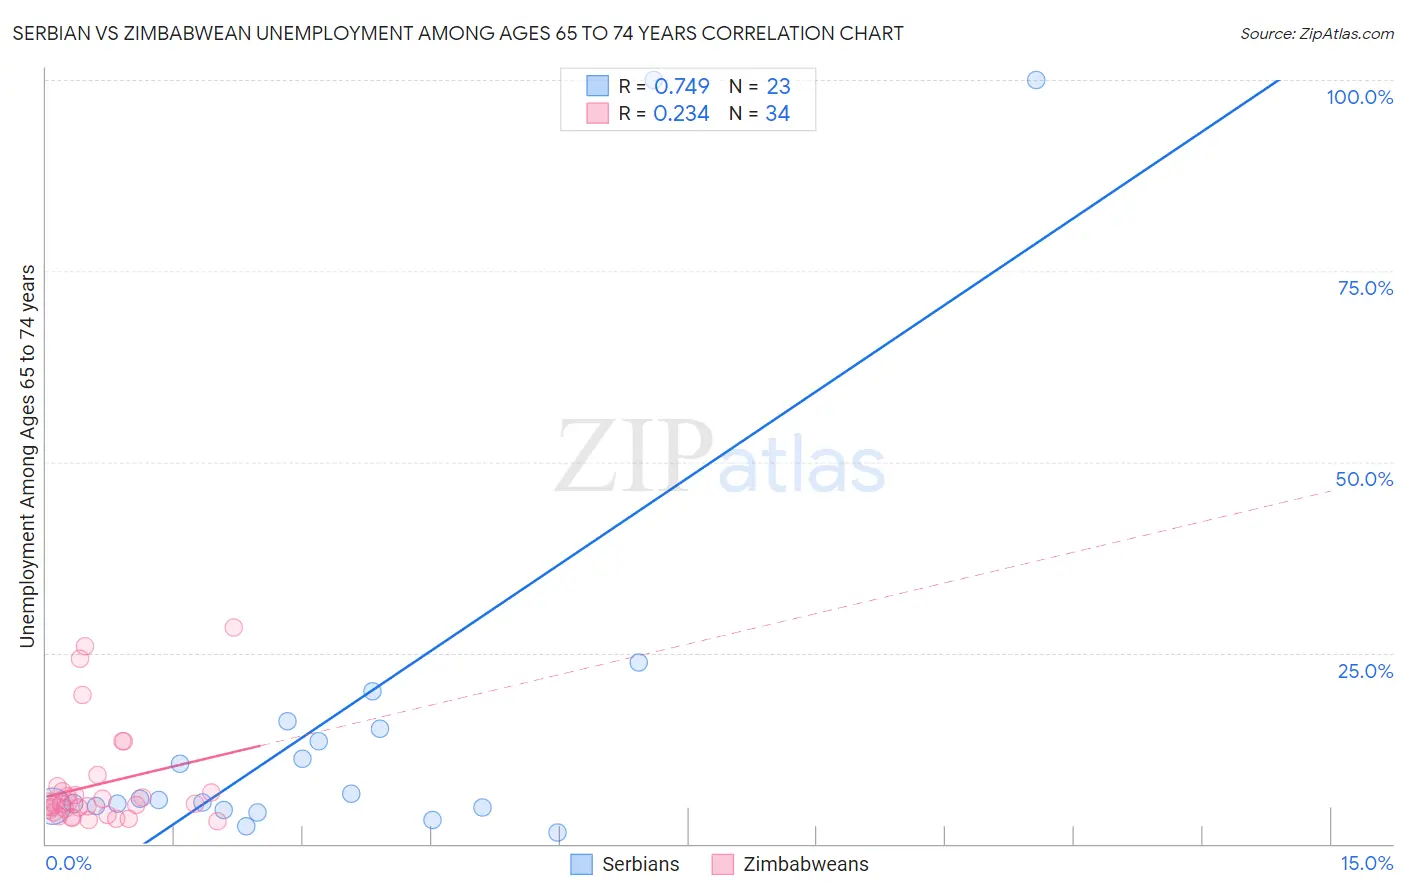 Serbian vs Zimbabwean Unemployment Among Ages 65 to 74 years